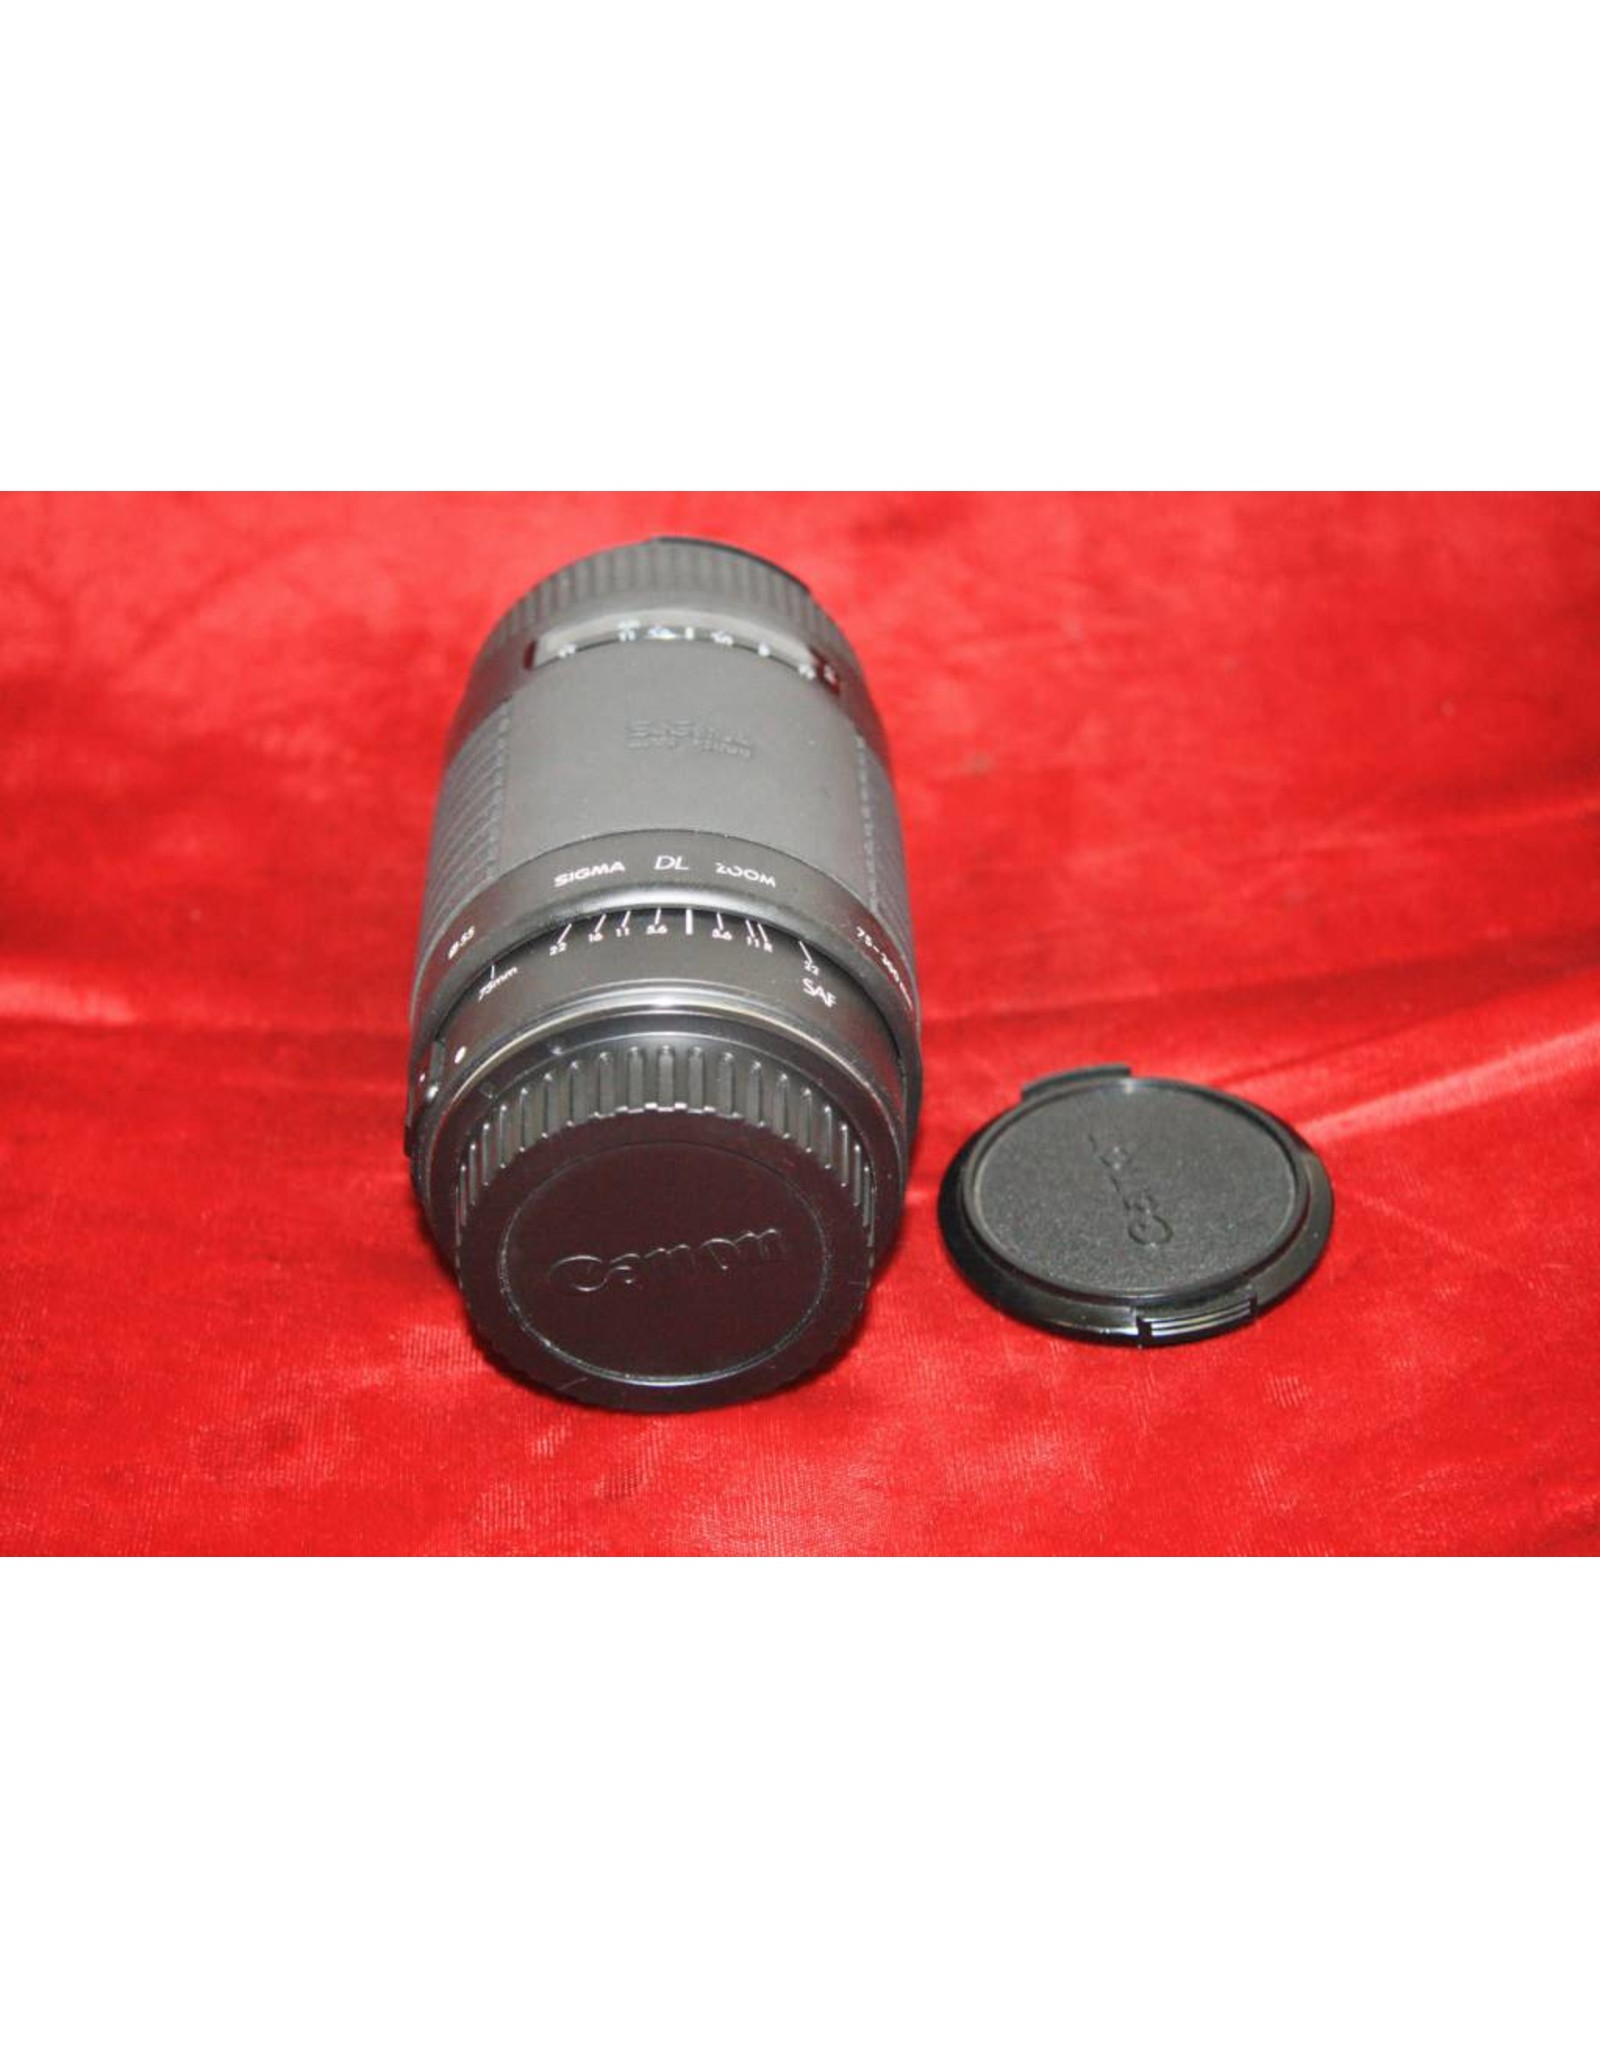 Sigma 75-300 mm f4-5.6 Canon EOS: For Film Camera Only( Auto focus not working)